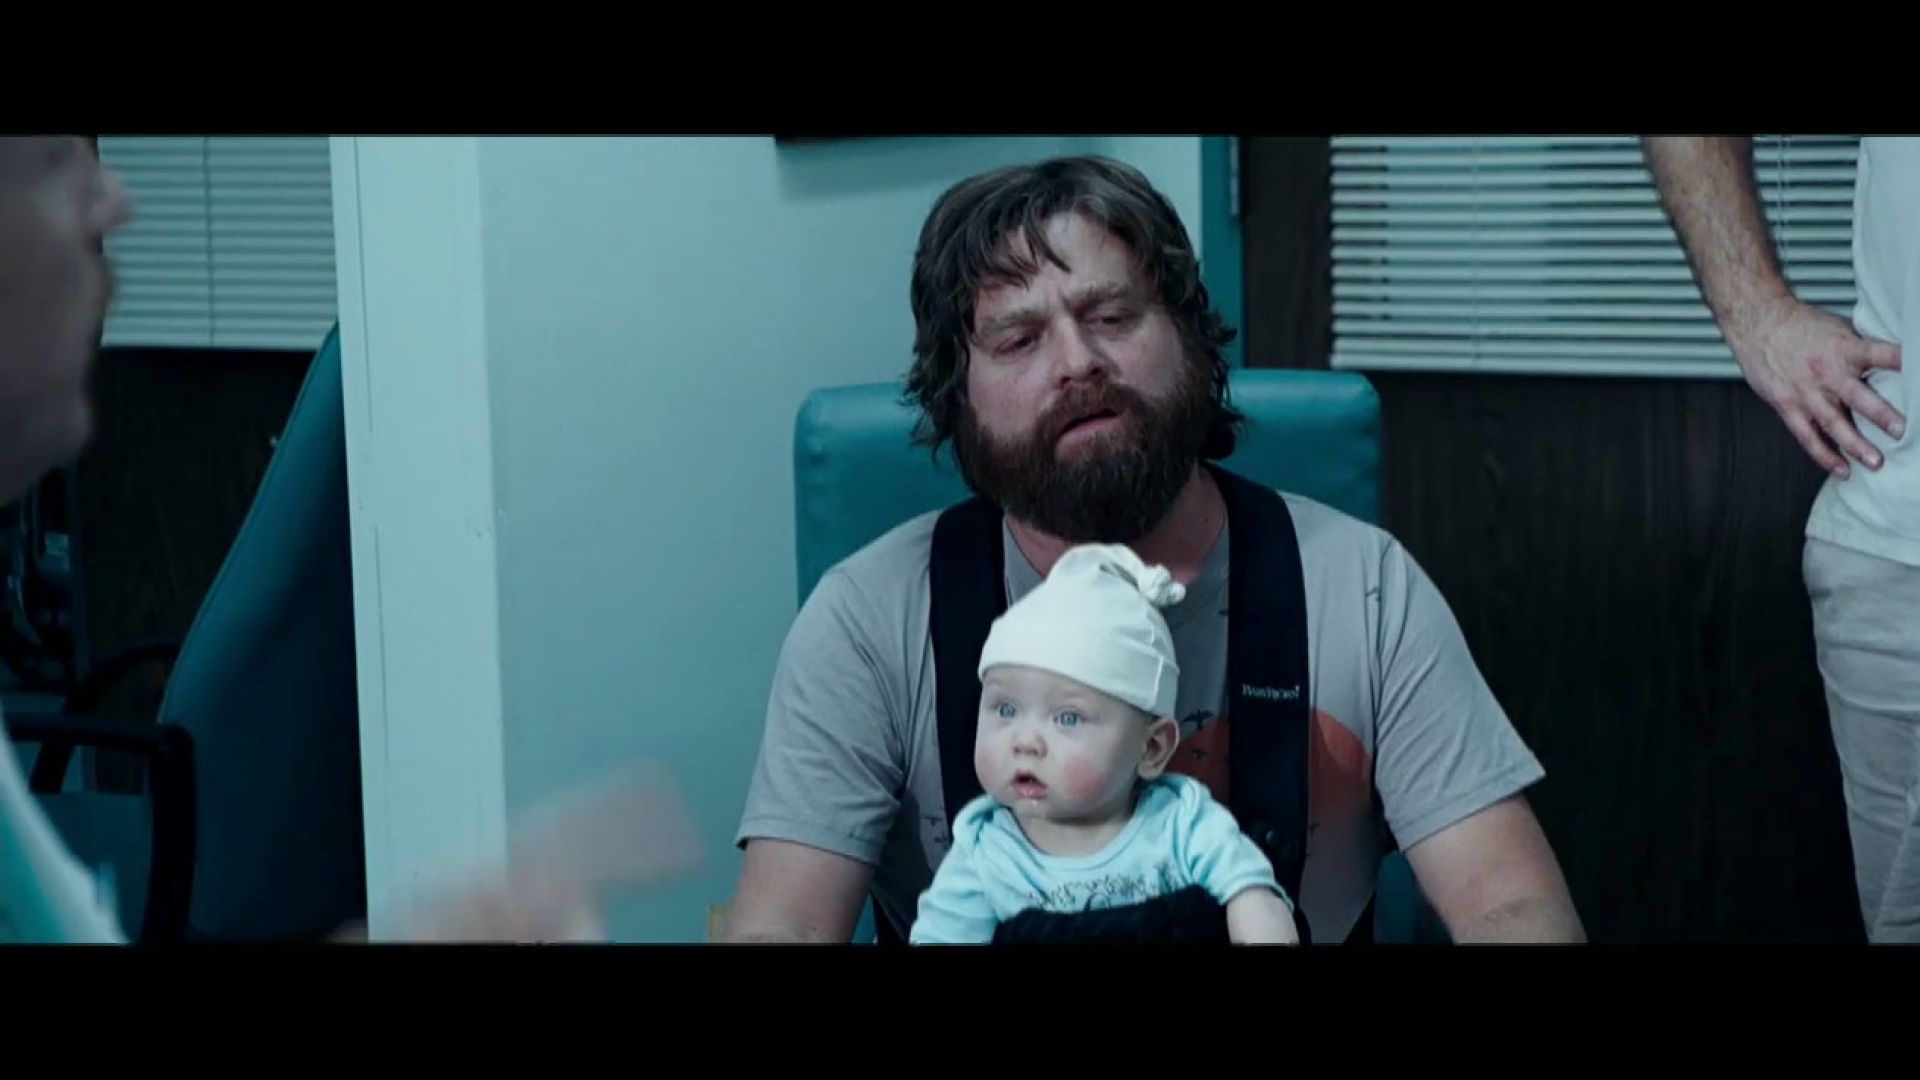 Doctor inspects old man in The Hangover